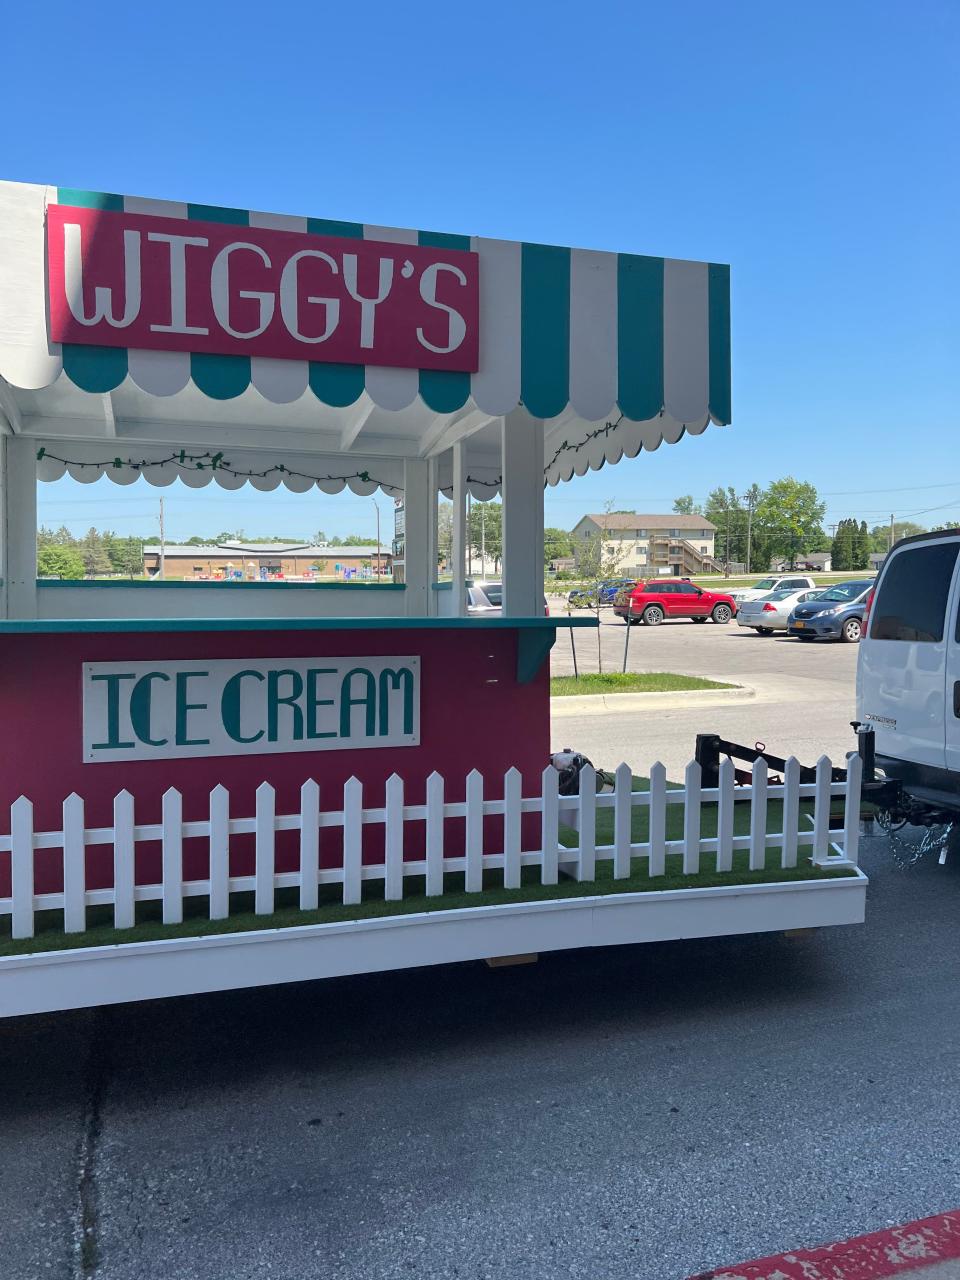 James Douthit visited Wiggy's Ice Cream at the North Grand Mall parking lot in Ames.